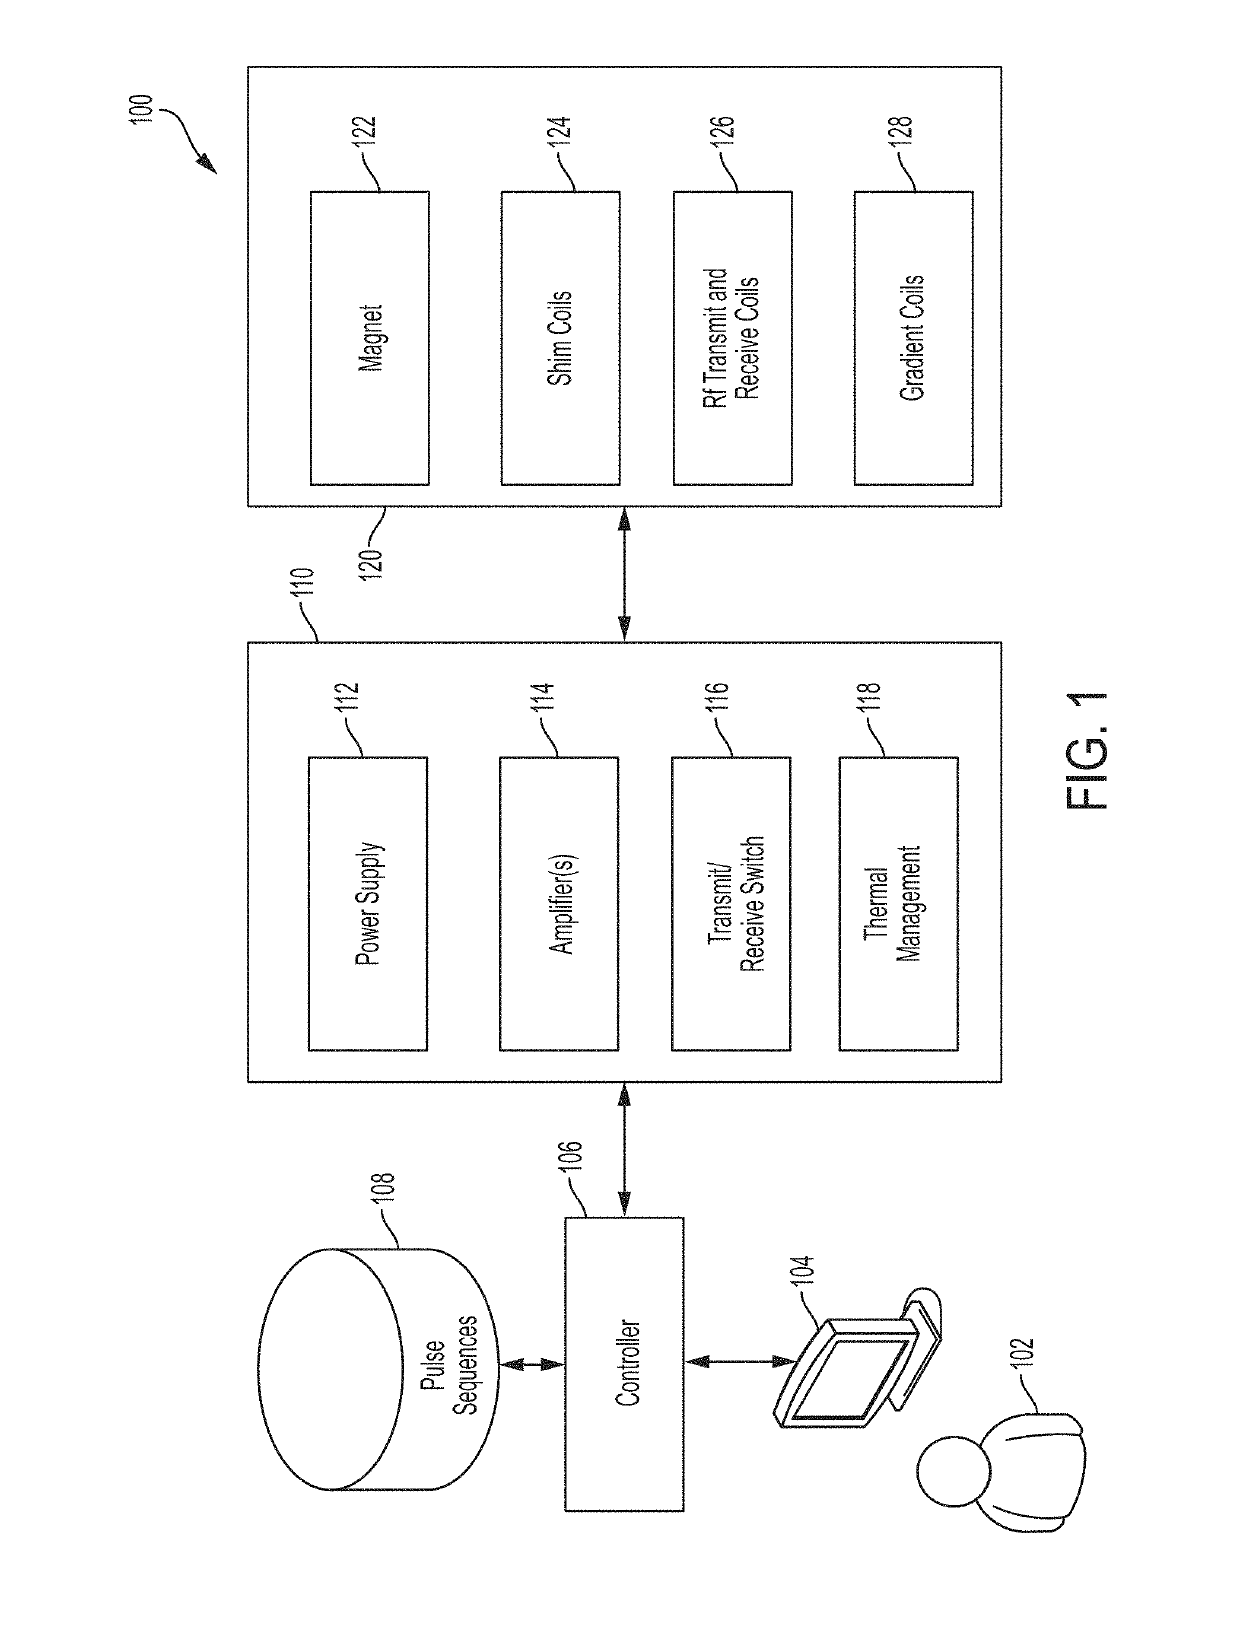 Low-field magnetic resonance imaging methods and apparatus